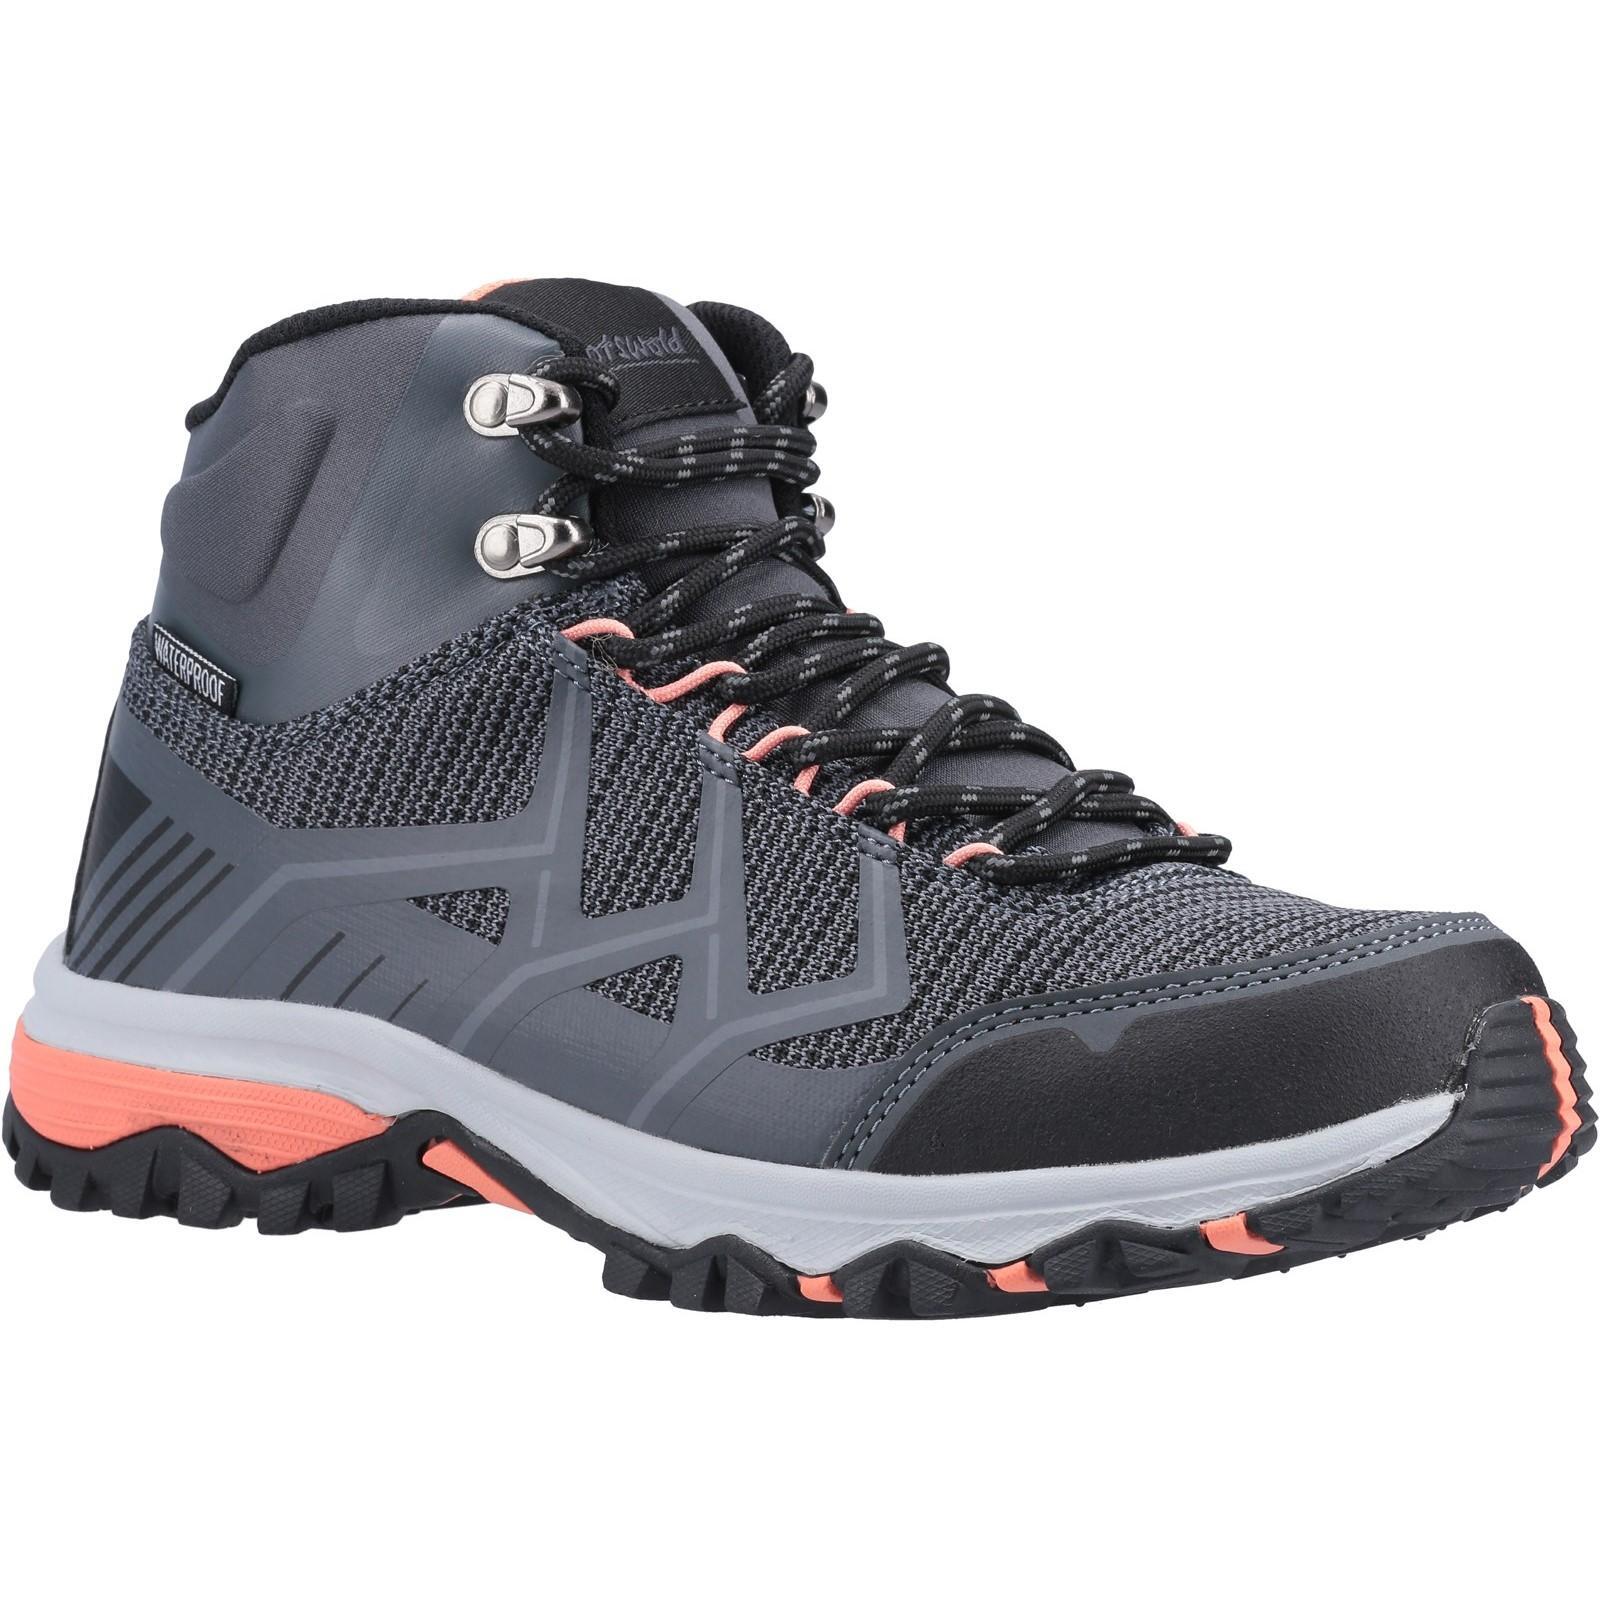 COTSWOLD Womens/Ladies Wychwood Hiking Boots (Grey/Coral)